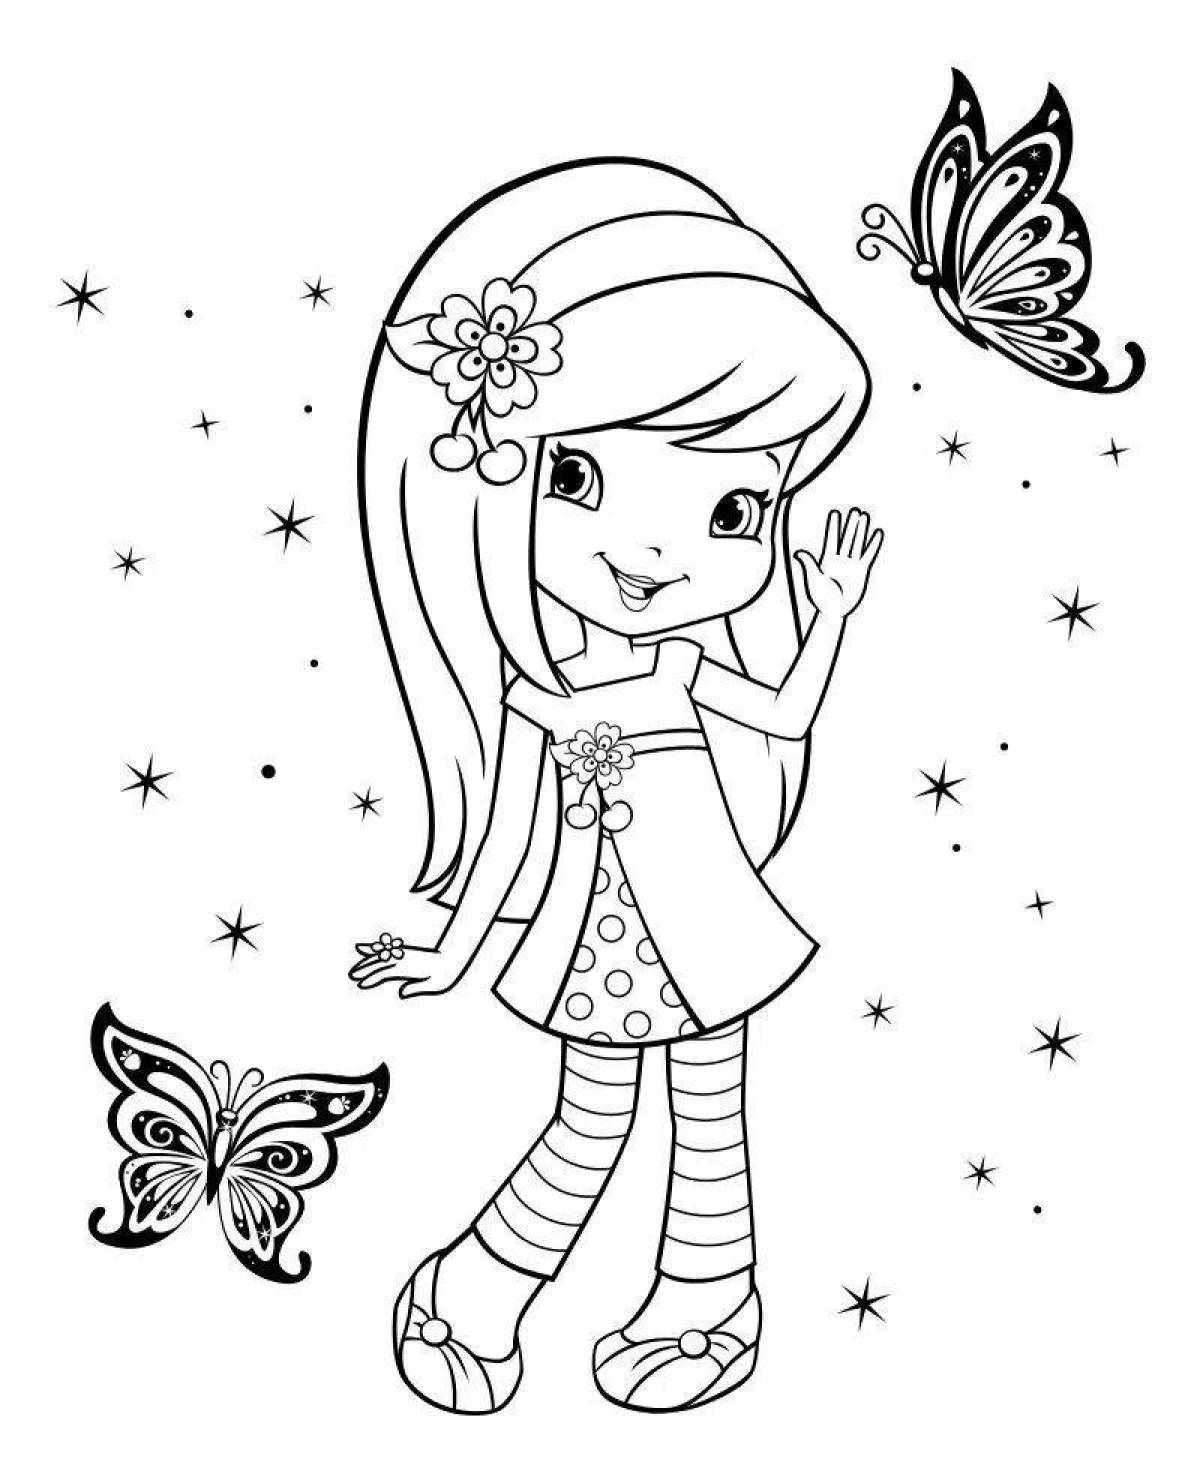 Cute strawberry coloring page